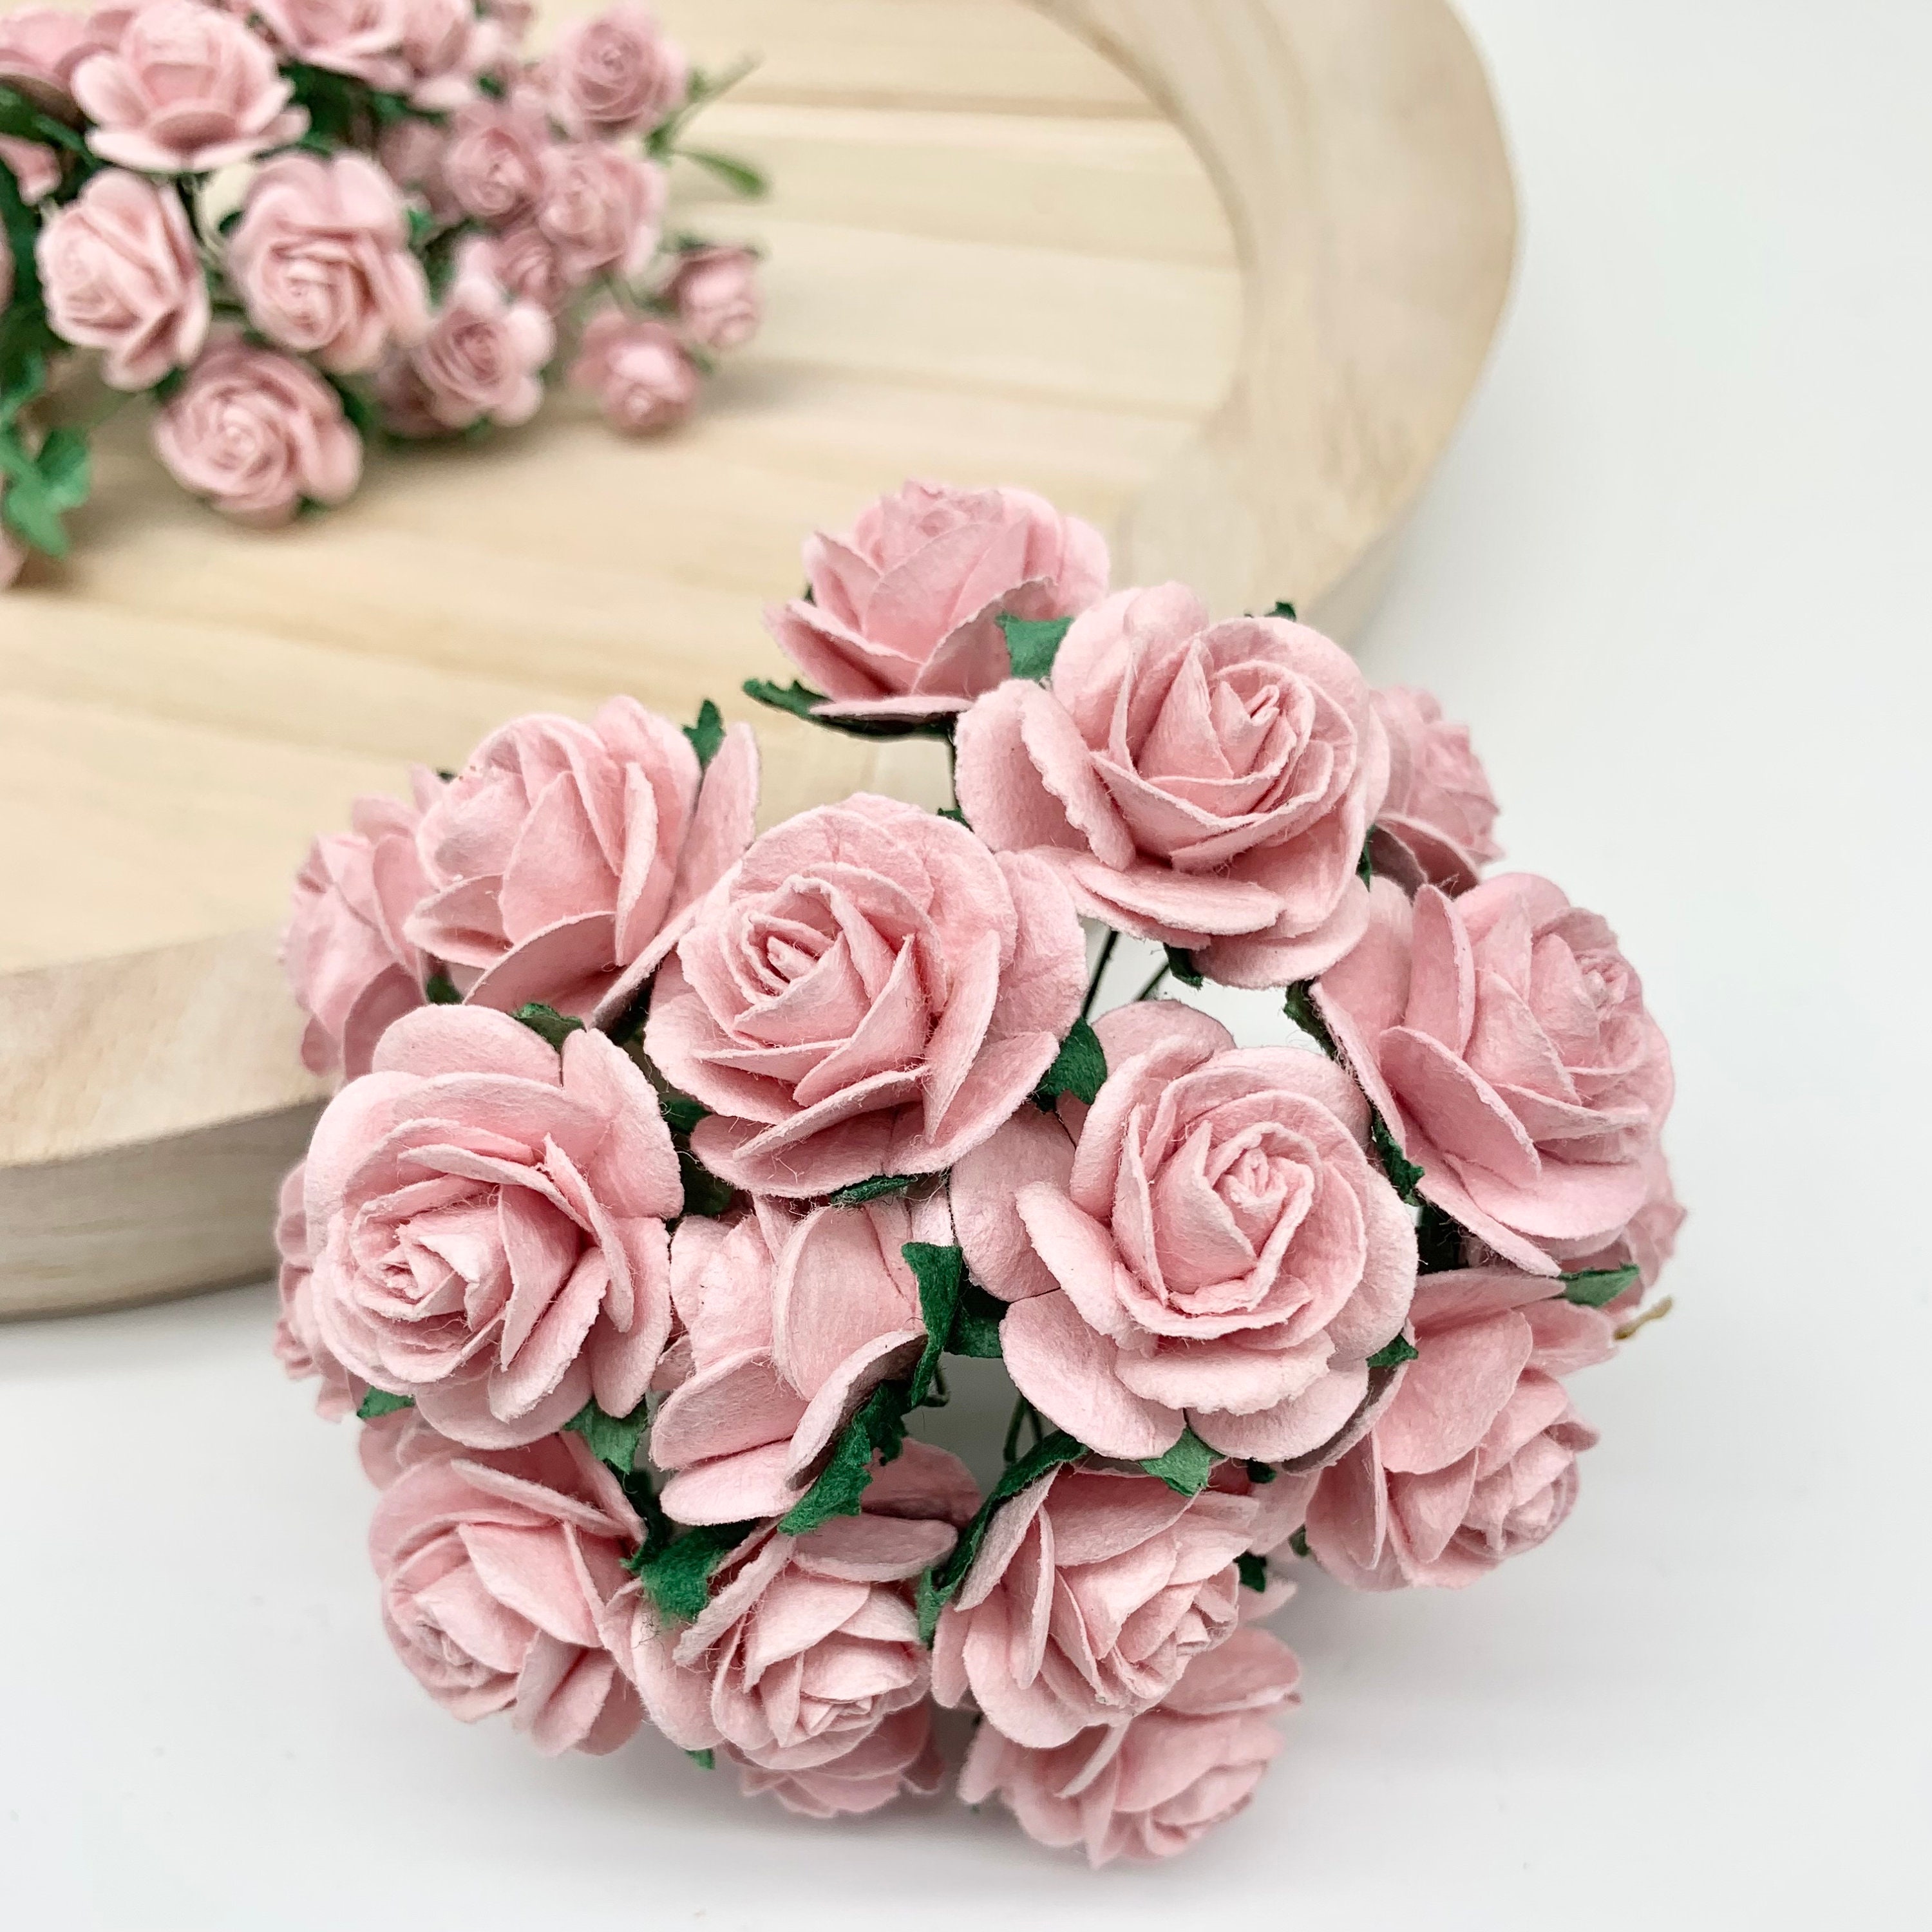  100 pcs Mini Rose Pink Color Mulberry Paper Flower 15mm  Scrapbooking Wedding Dollhouse Supplies Card, Small Roses. : Home & Kitchen